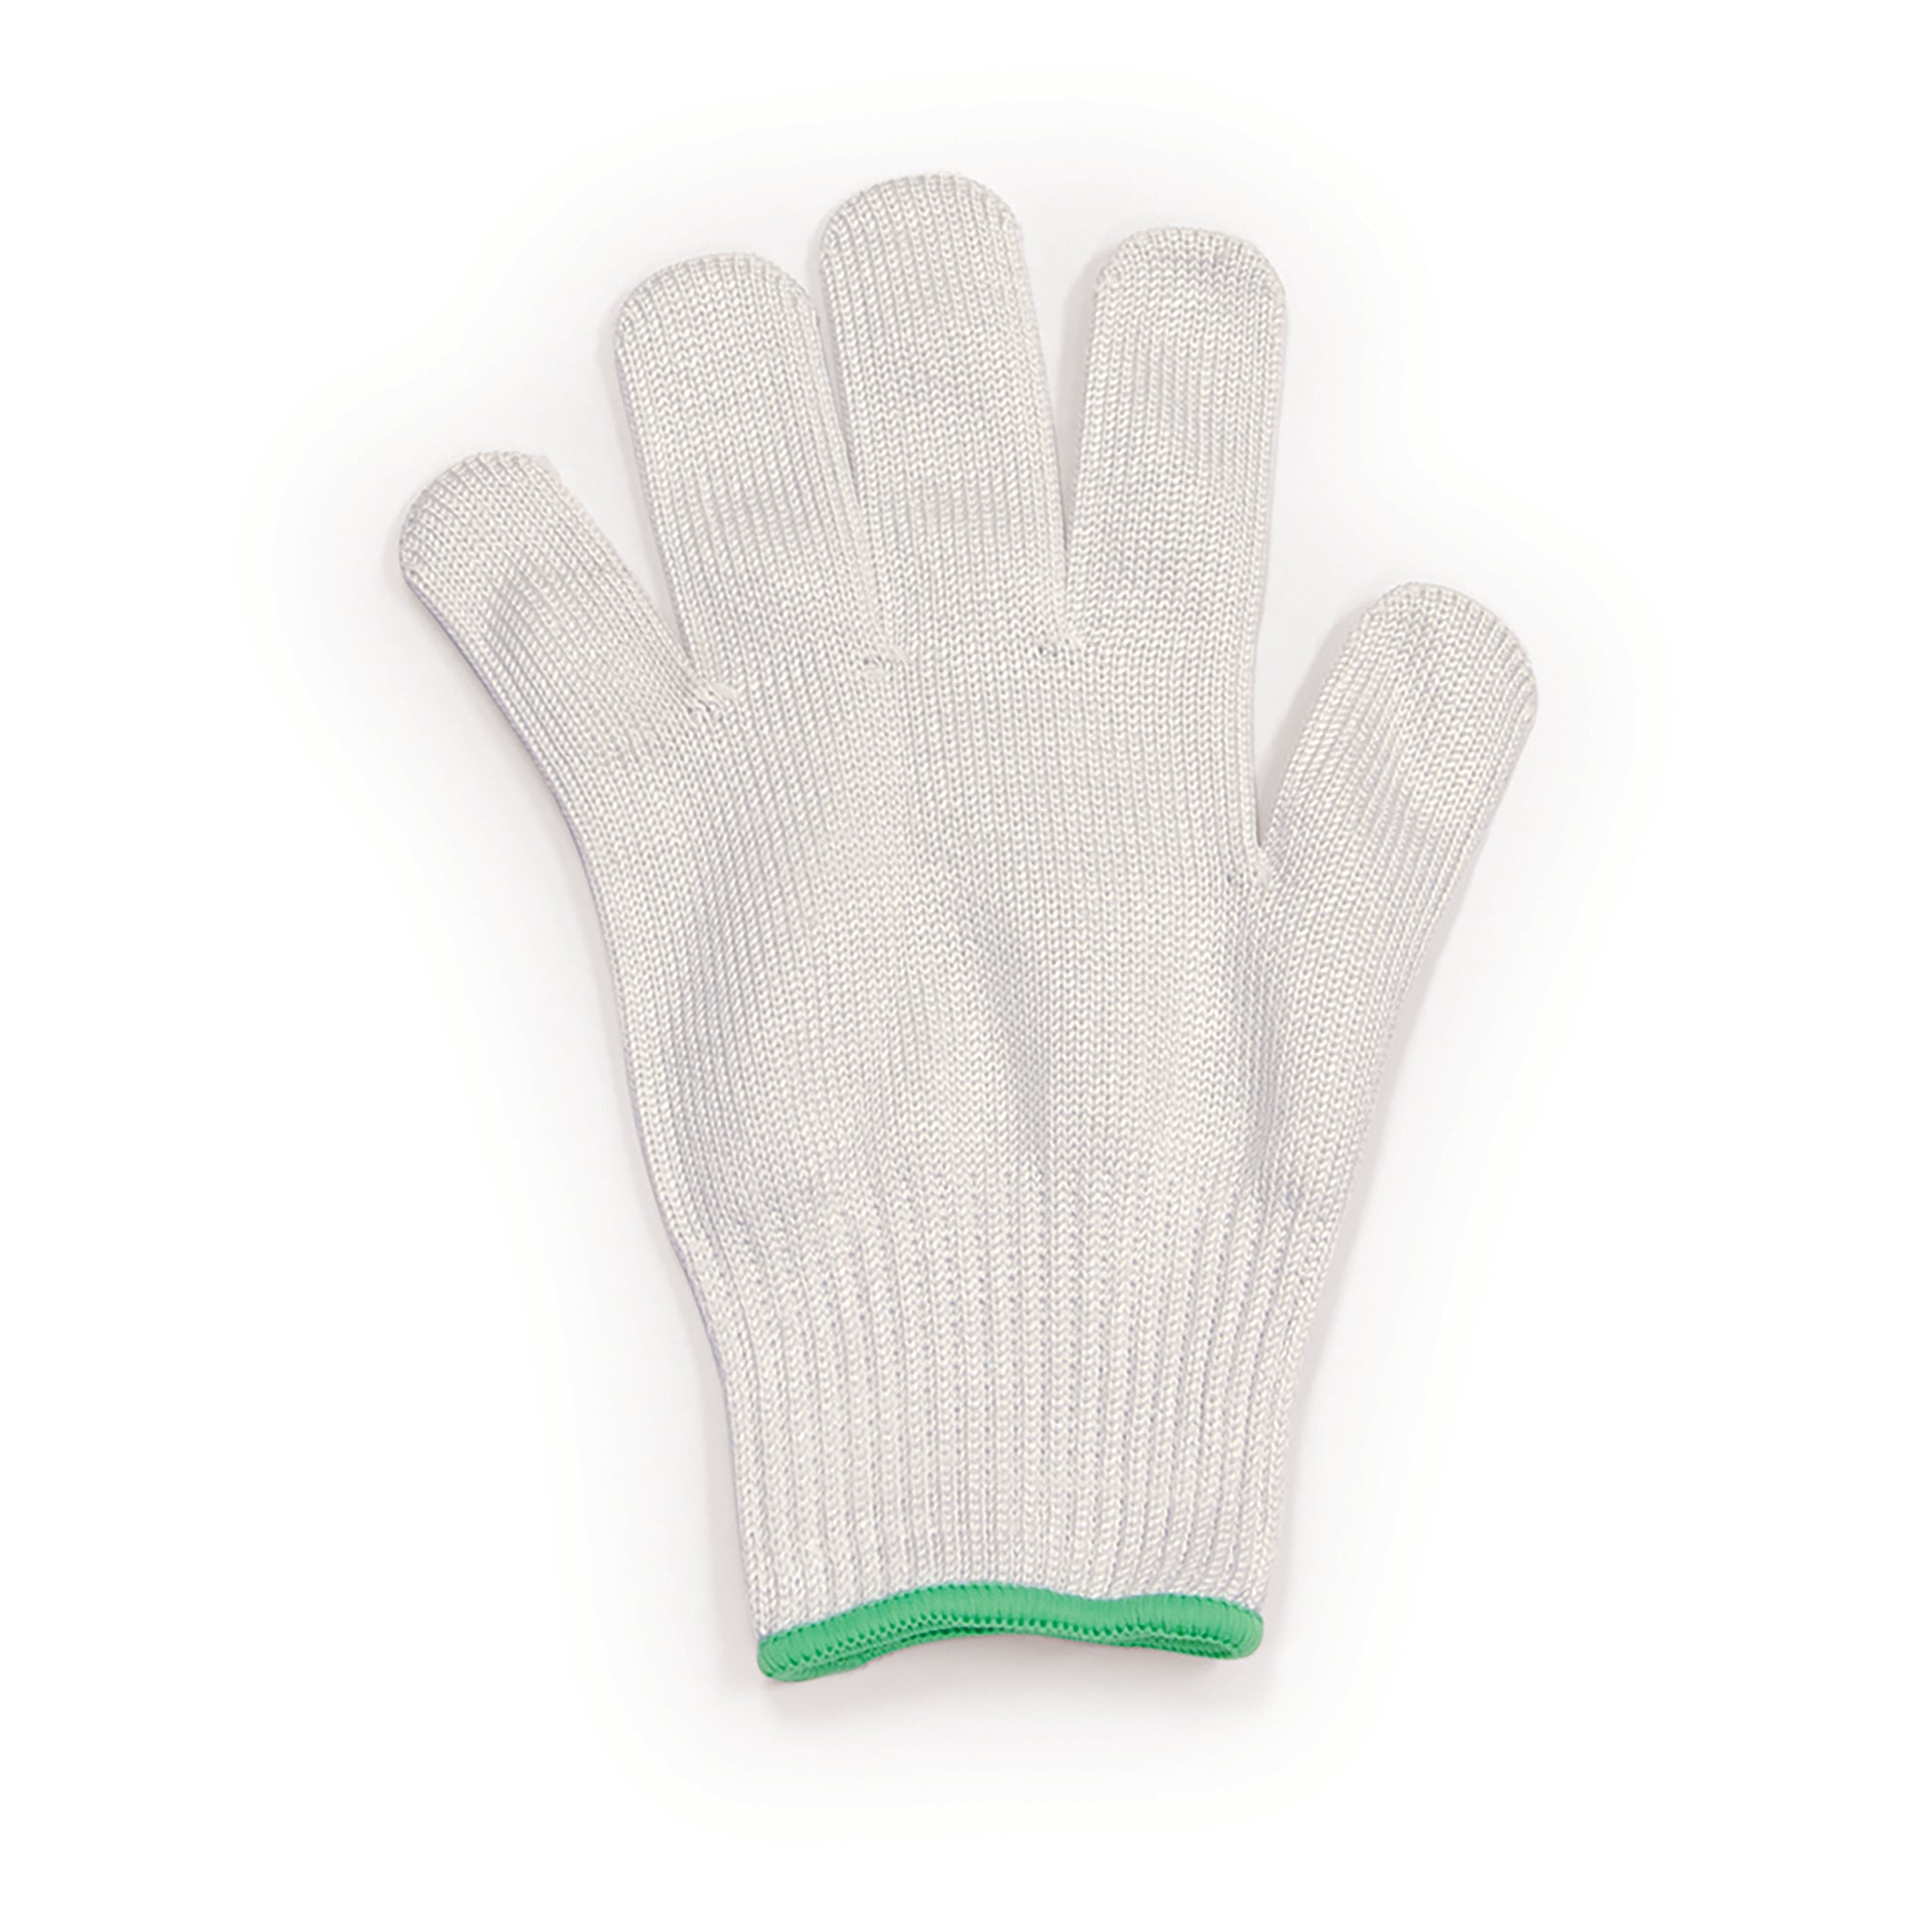 Cut Resistant Work Gloves with Logo